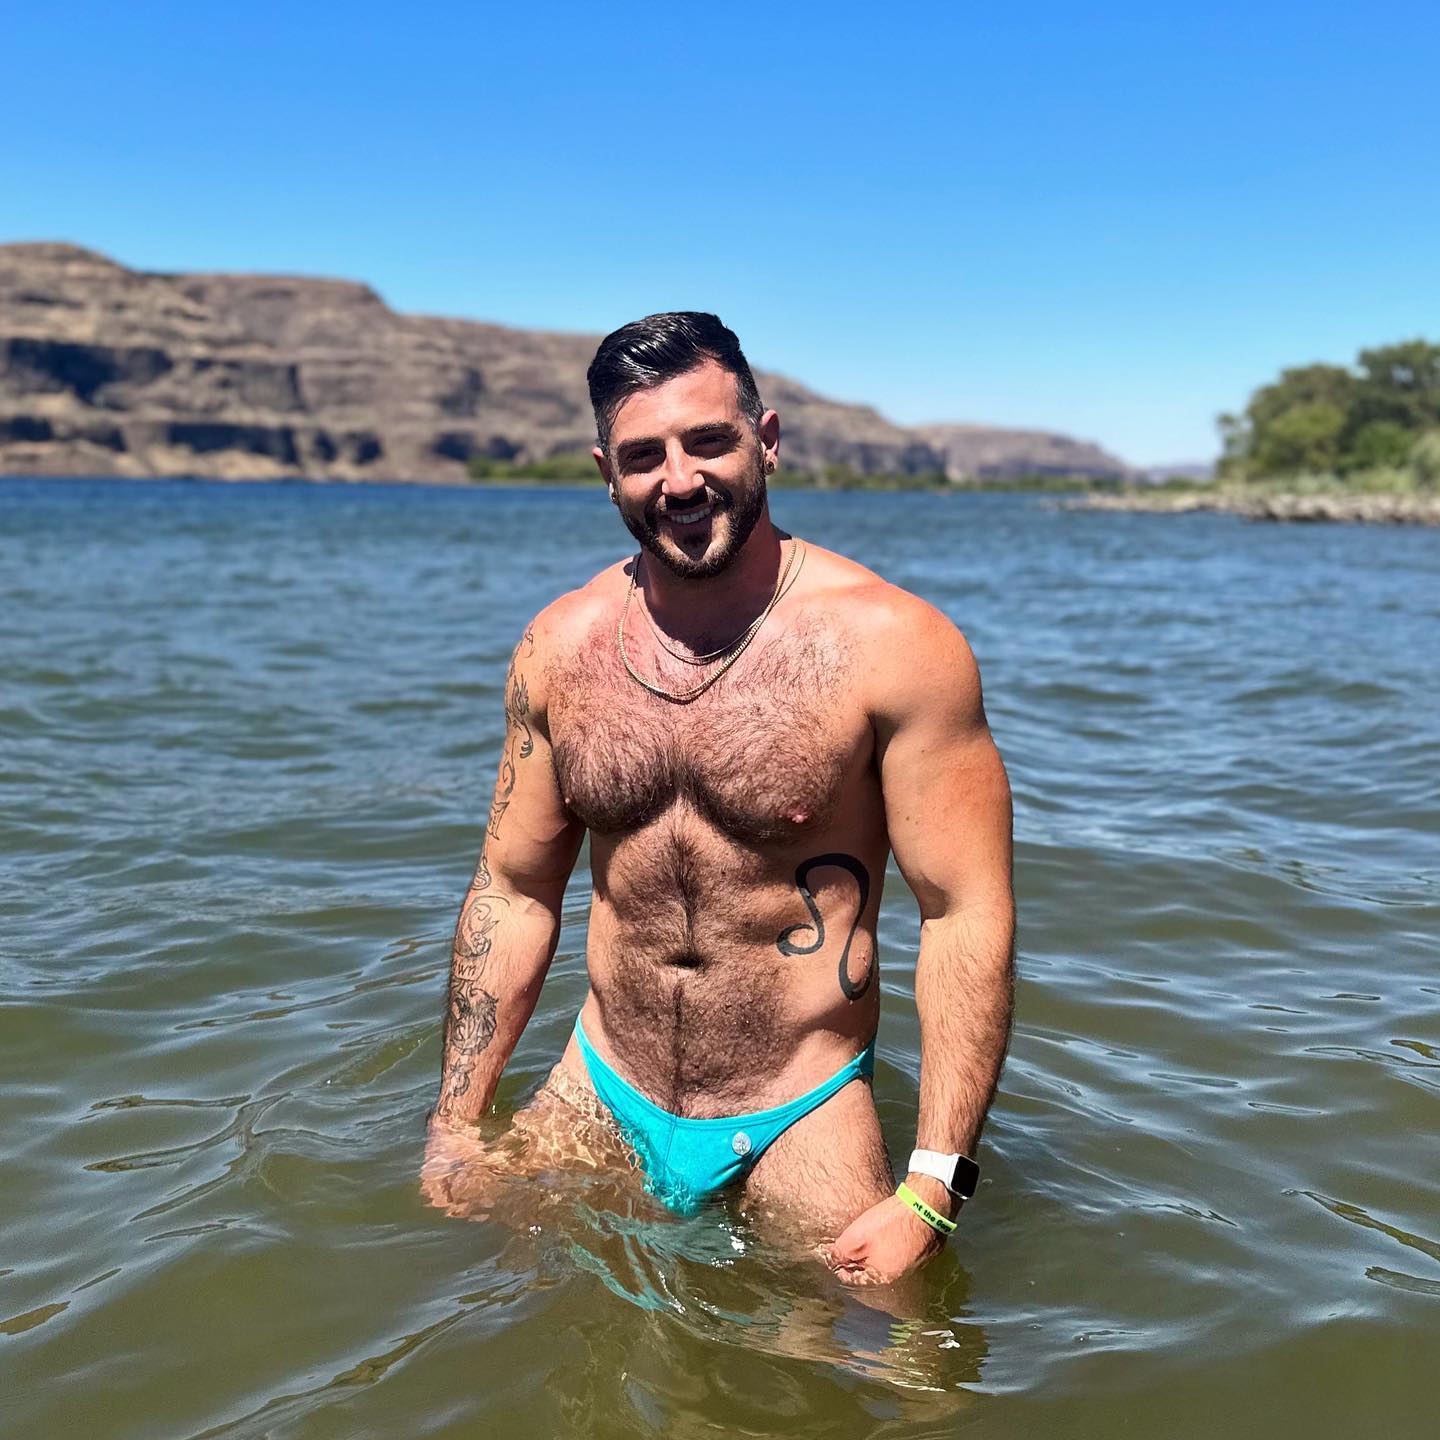 Cooling off before the plunge into #thegorgeamphitheater 

.

.

.

.

.

#boysatthebeach #gaysatthebeach #hairybeachboys #gaybeach #gaybeachboy #hairyscruffyhomo #hairymusclecub #hairymusclejock #hairygayman #hairygayguy #hairymenlovers #hairymens #hairymengalore